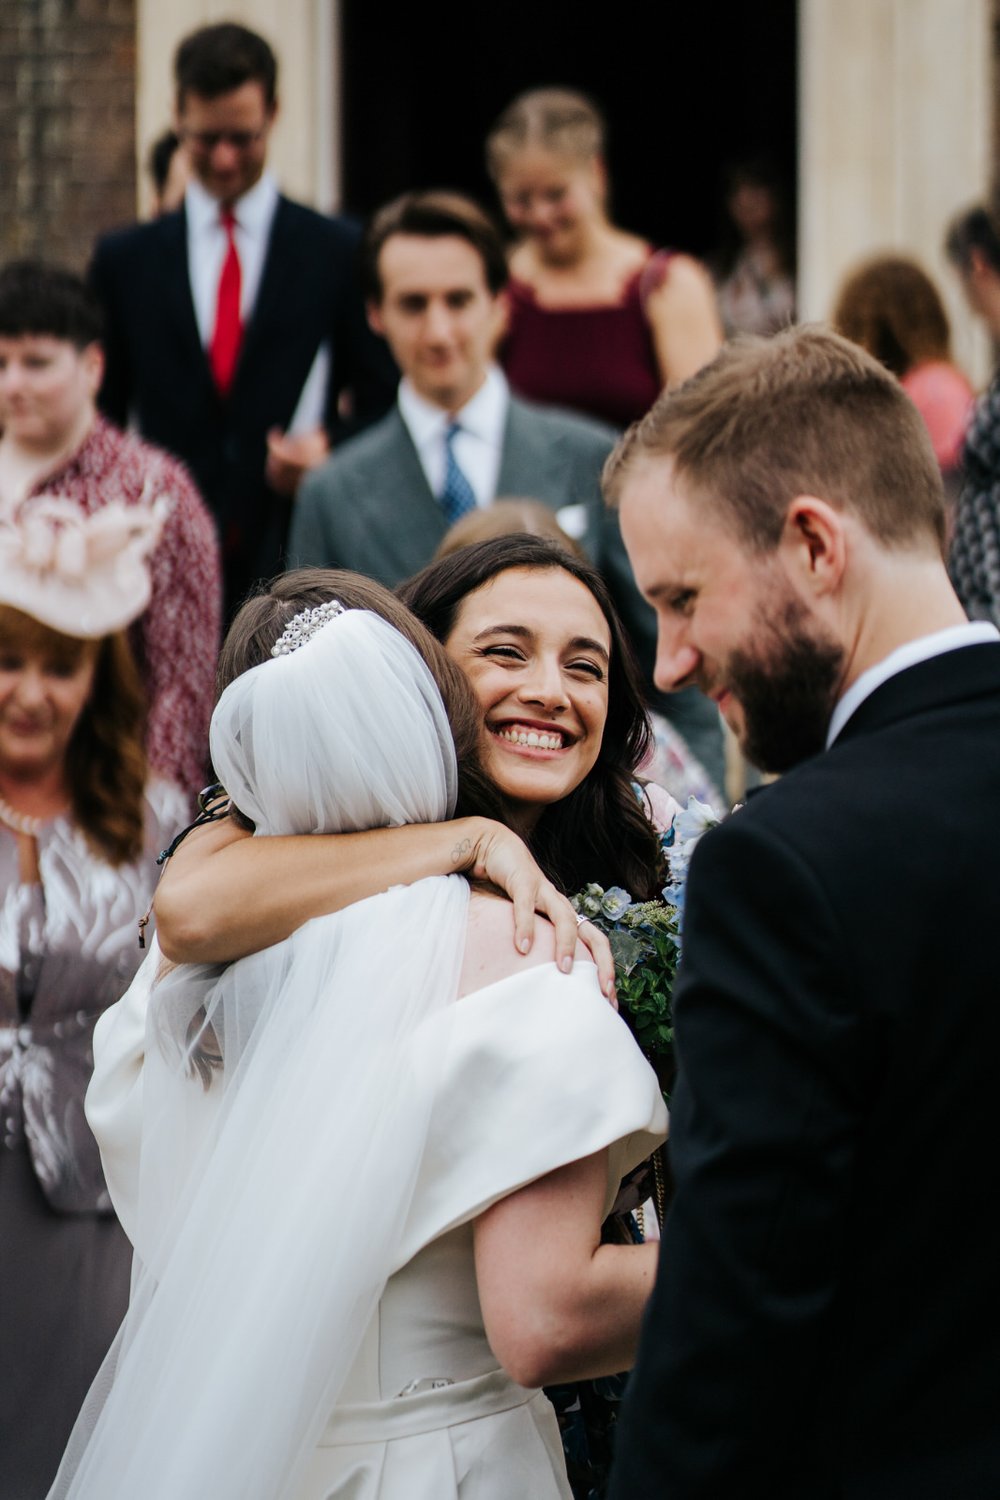 Guest hugs bride and smiles right after wedding ceremony at Little Banqueting House in London